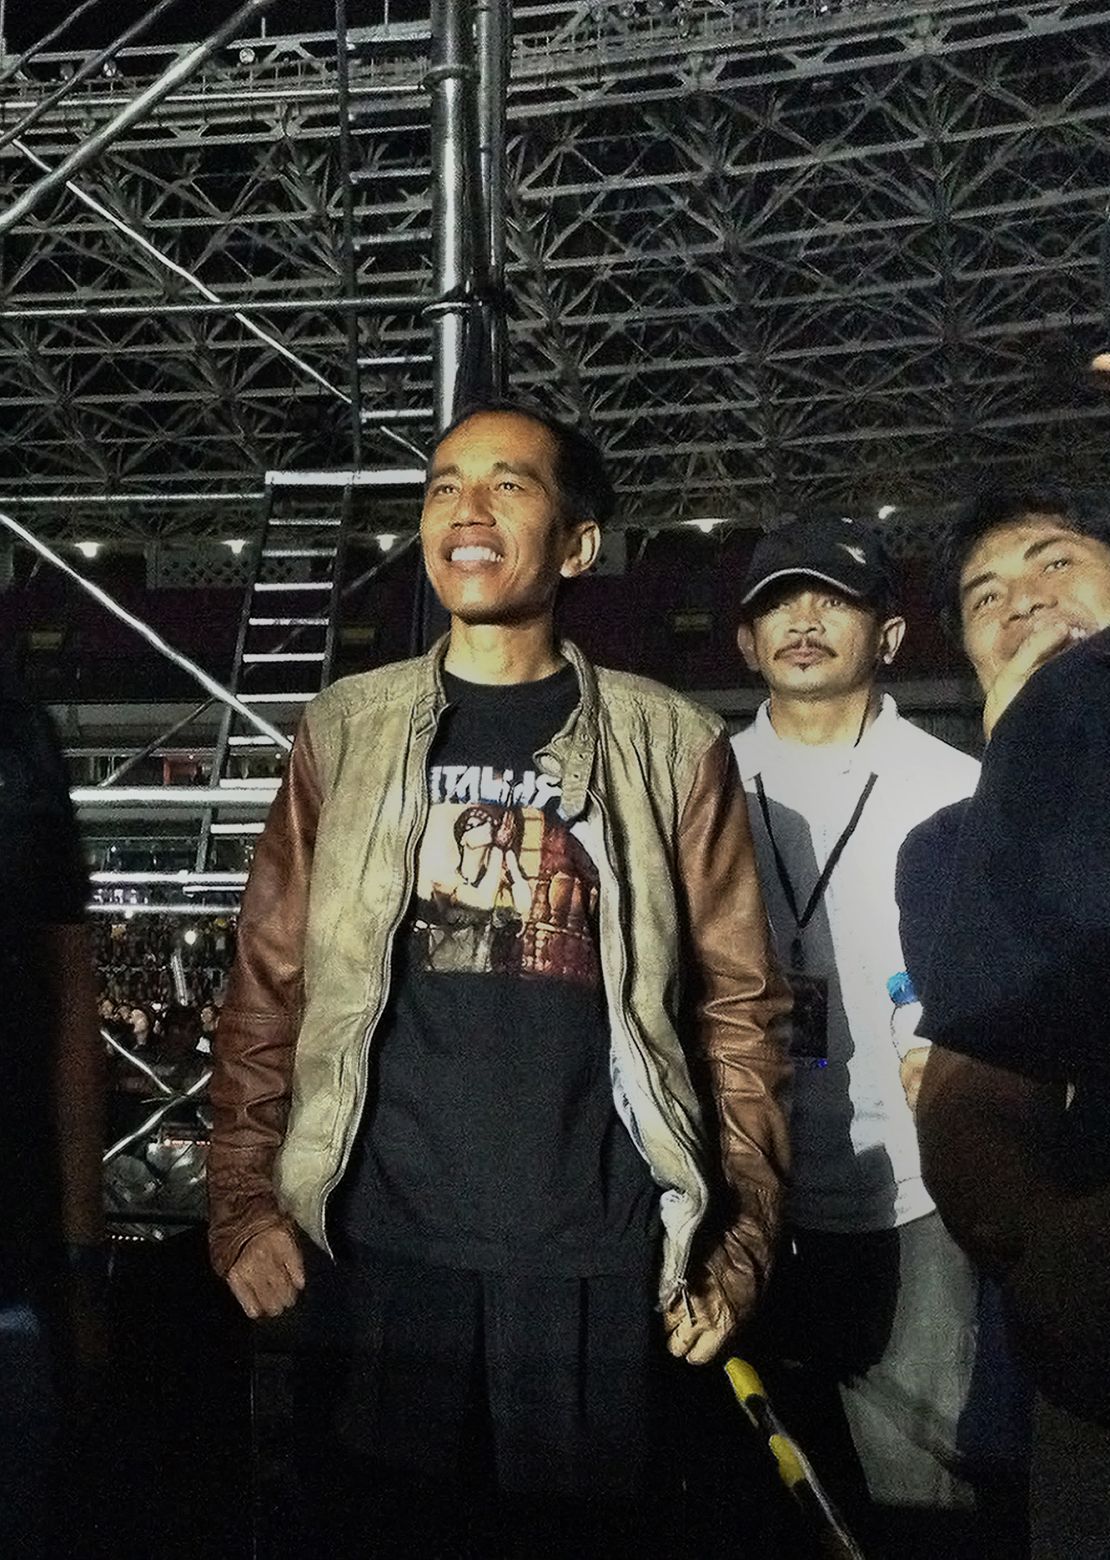 In this photograph taken on August 25, 2013, then-Jakarta governor Joko Widodo, watches a Metallica concert at the Bung Karno stadium in Jakarta.